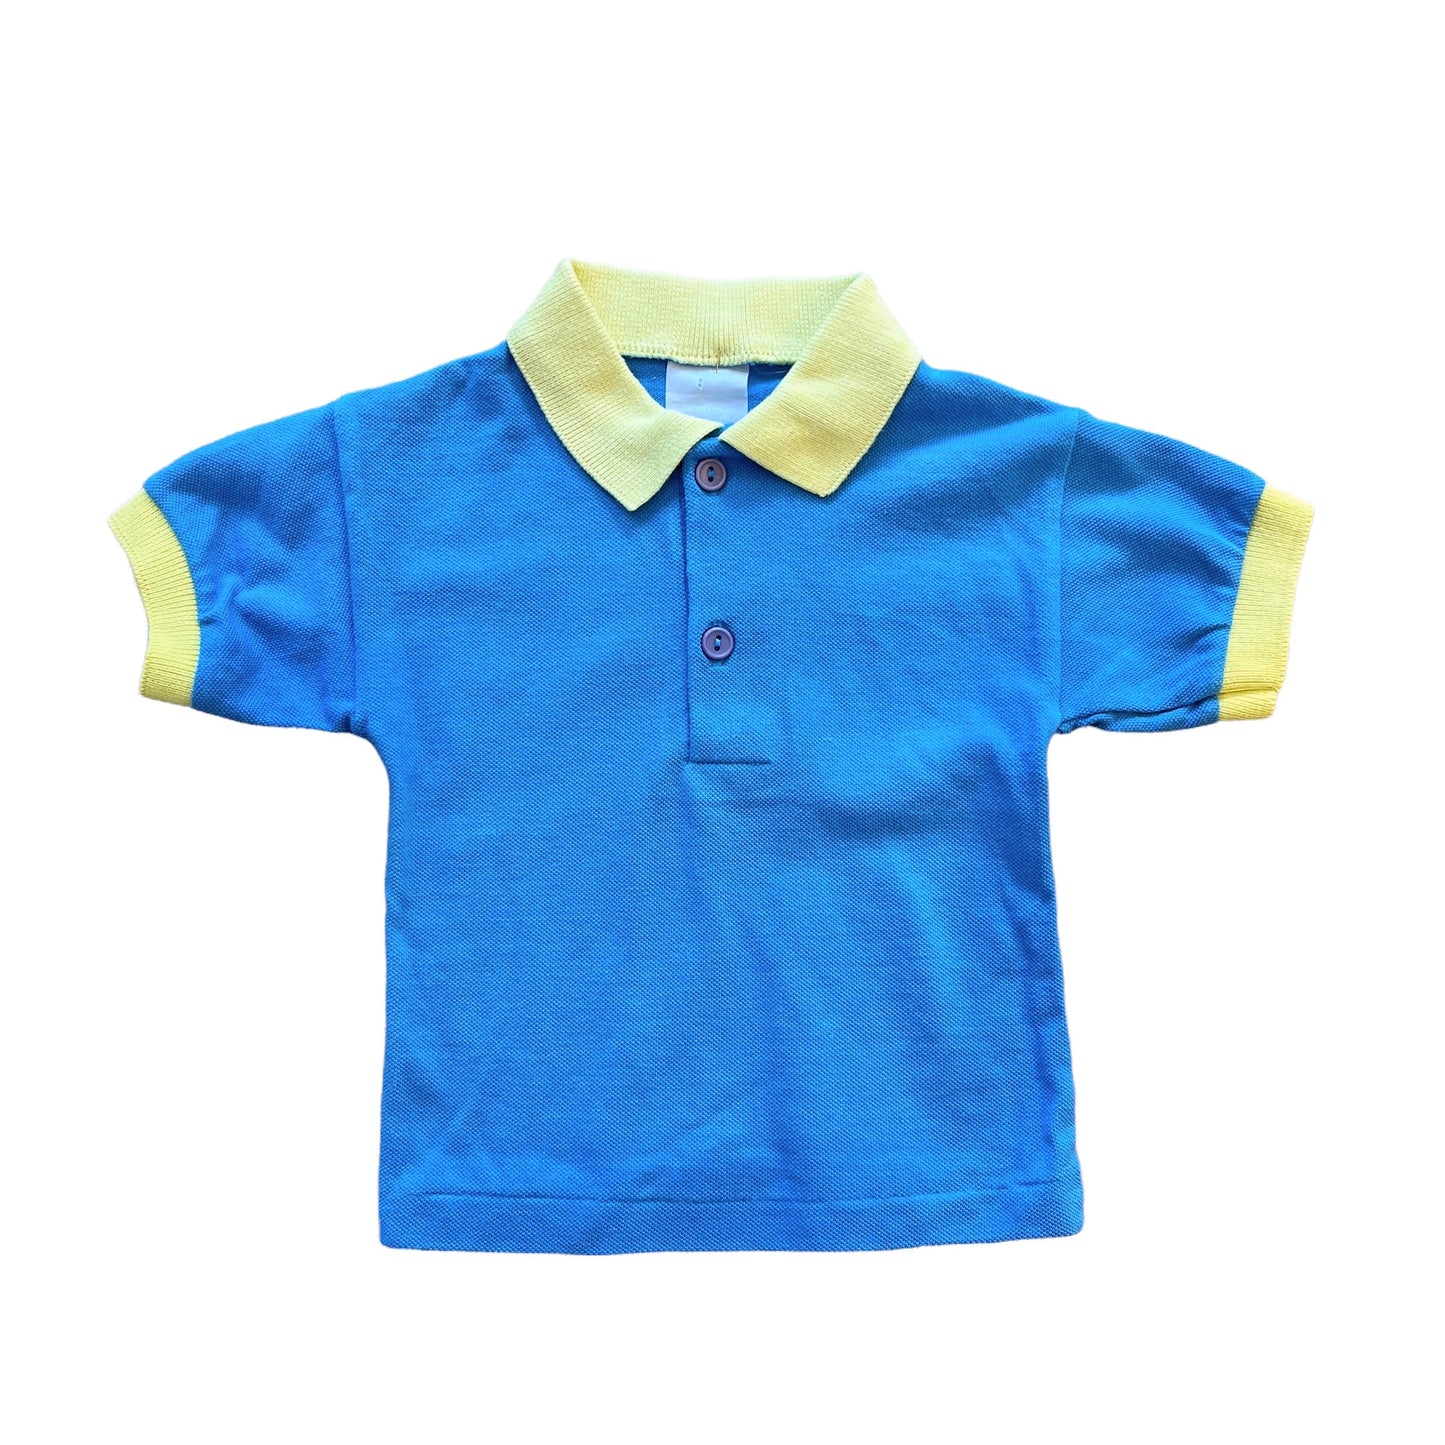 Vintage 70's Turquoise Baby Polo Top / 6-9 Months